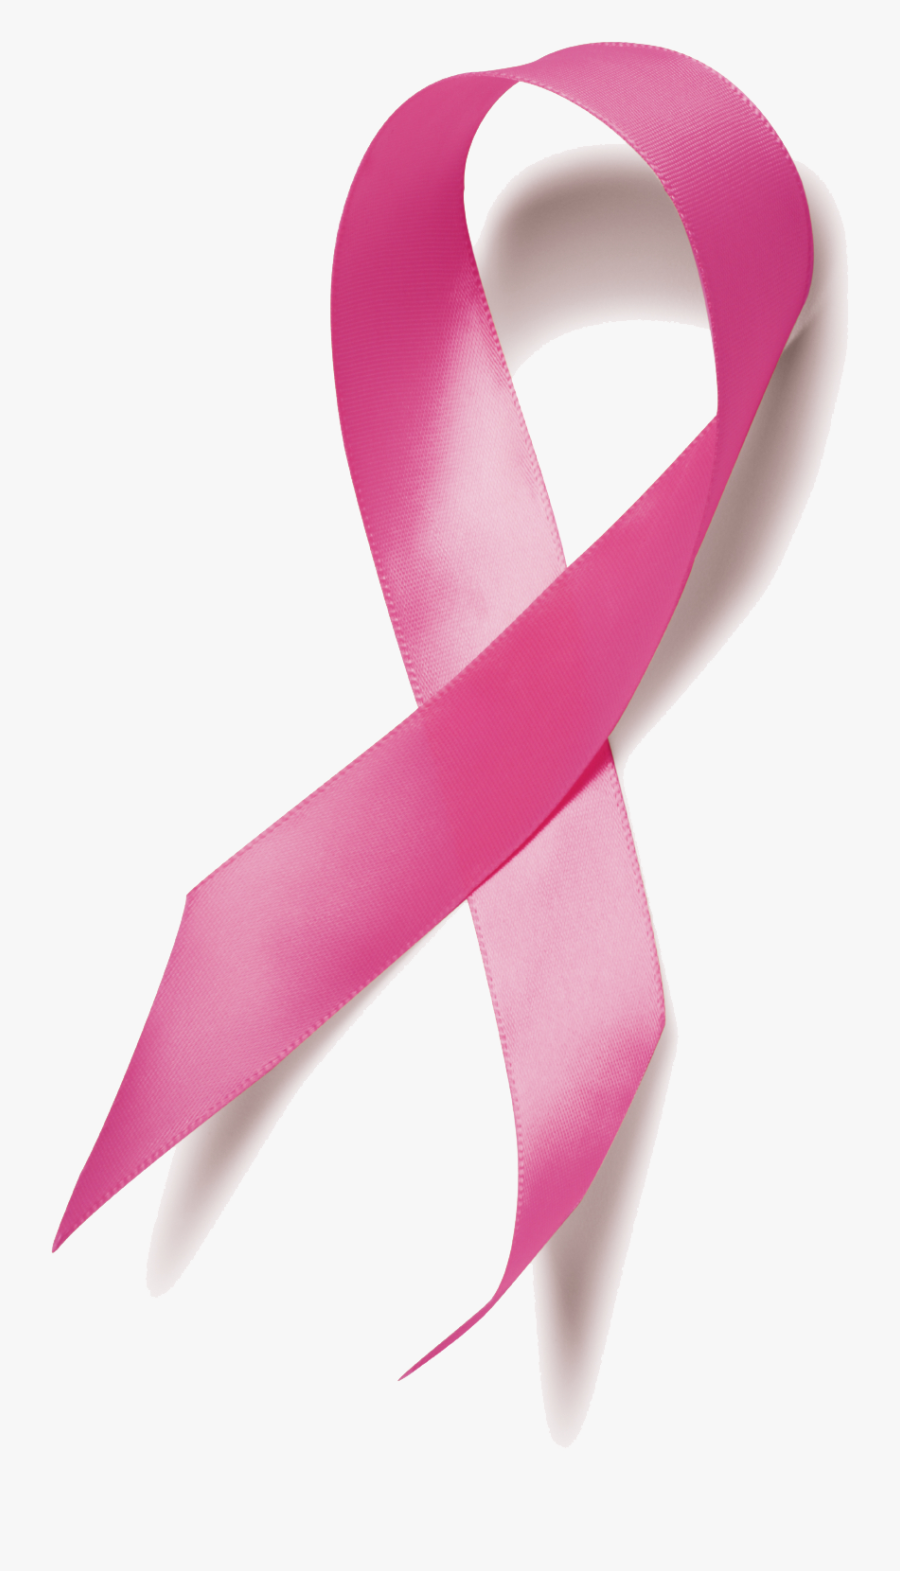 Breast Cancer Ribbon Free Png Image - Breast Cancer Foundation Ribbon, Transparent Clipart